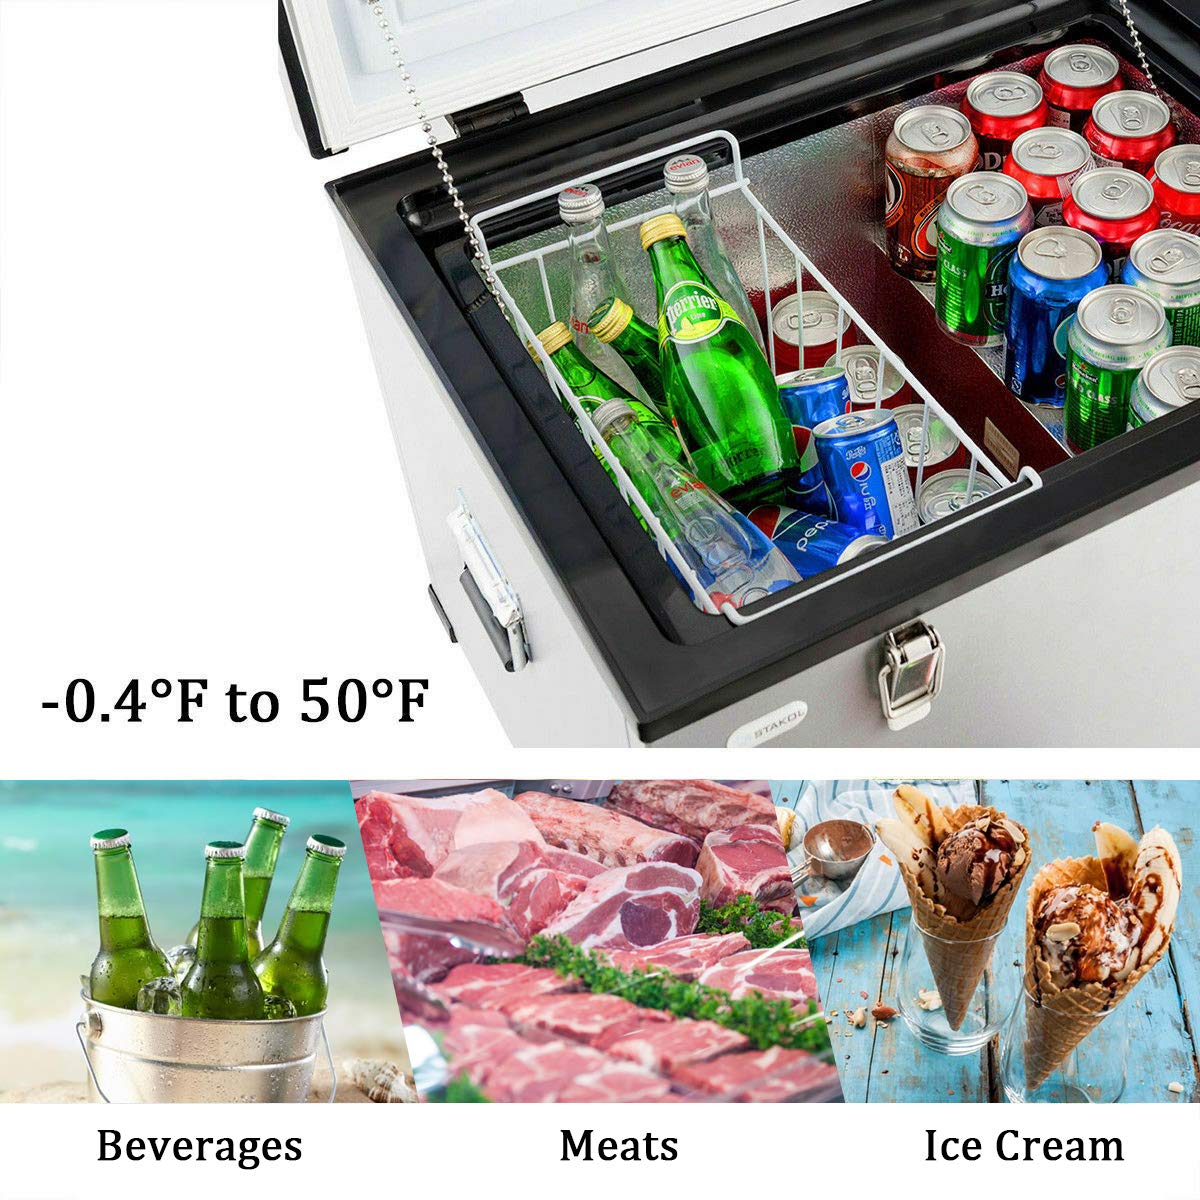 COSTWAY Chest Freezer, 63-Quart Compressor Travel Refrigerator with 3 Levels, -0.4°F to 50°F, Adjustable Temperature, LCD Display, 2.3 Cu.ft Single Door Vehicle Fridge for Car, Home, Camping